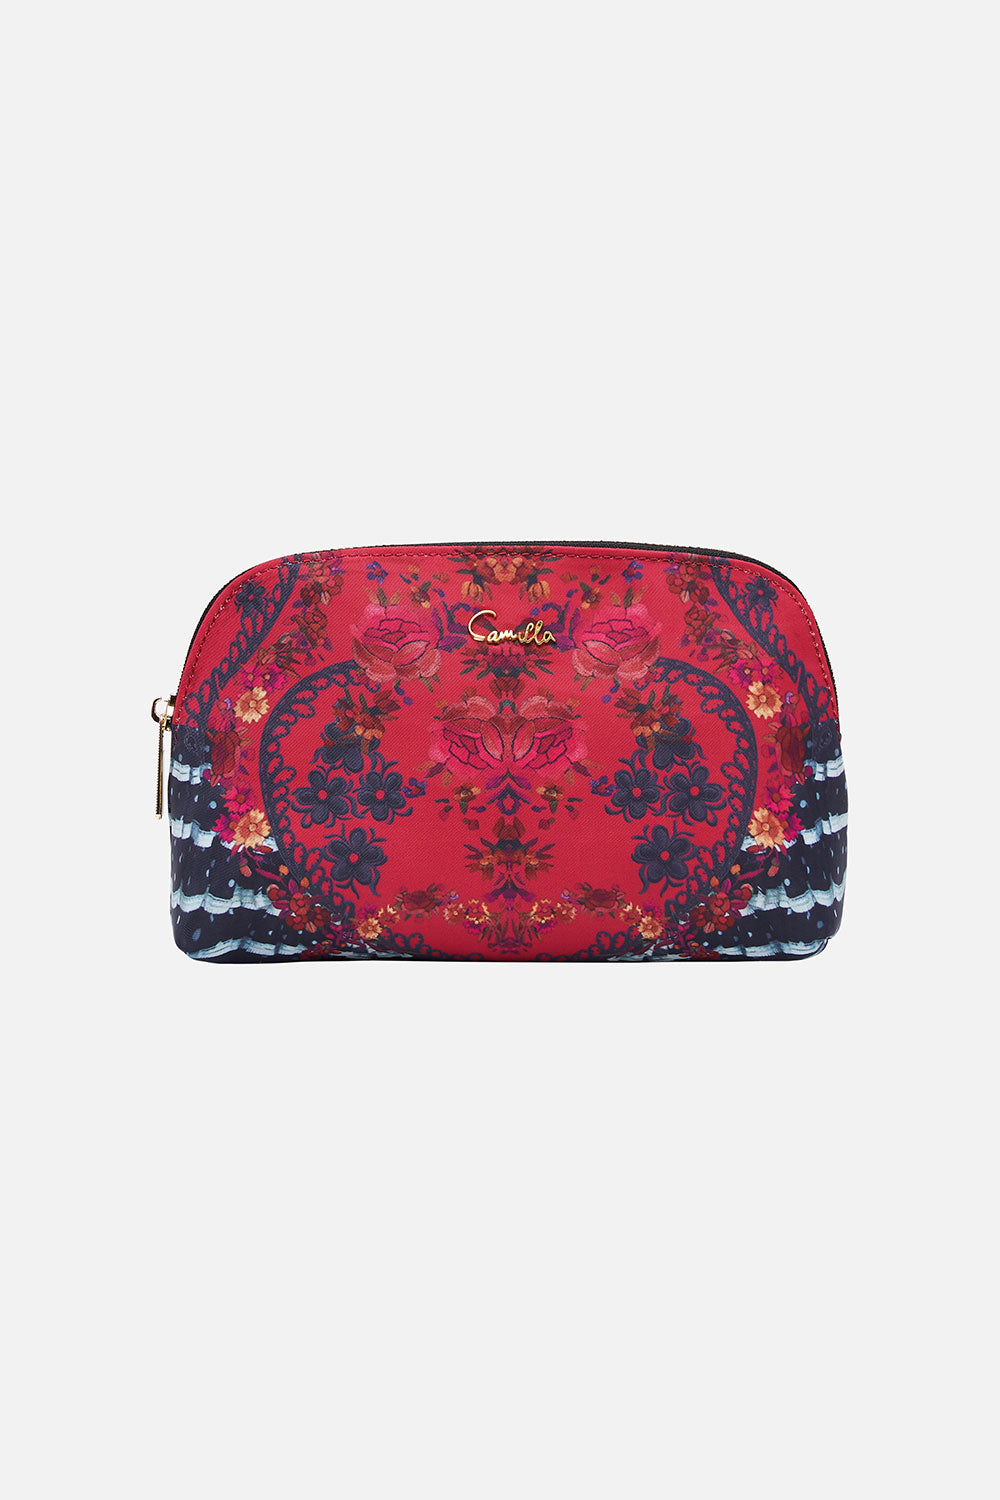 SMALL COSMETIC CASE VIEW FROM THE VEIL